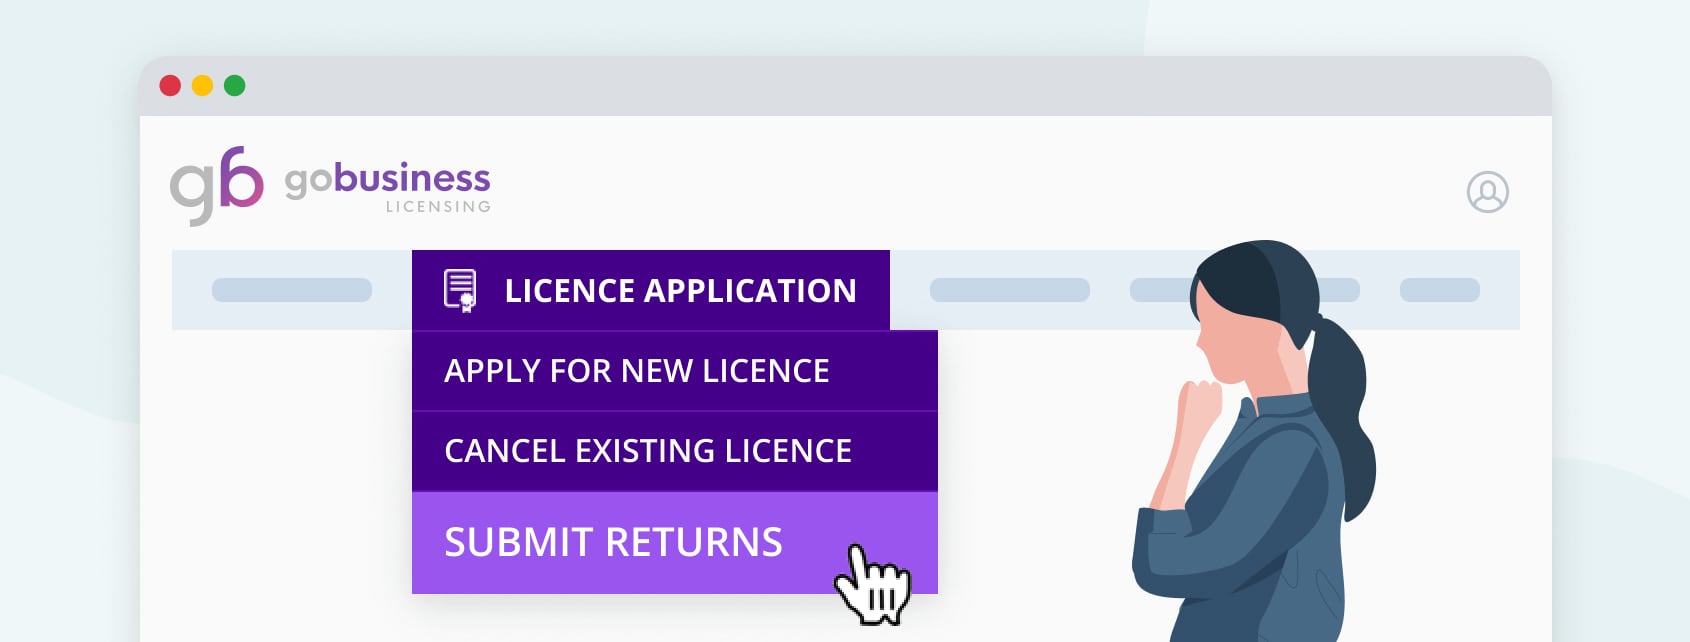 Submit returns via the Licence Application dropdown in GoBusiness Licensing